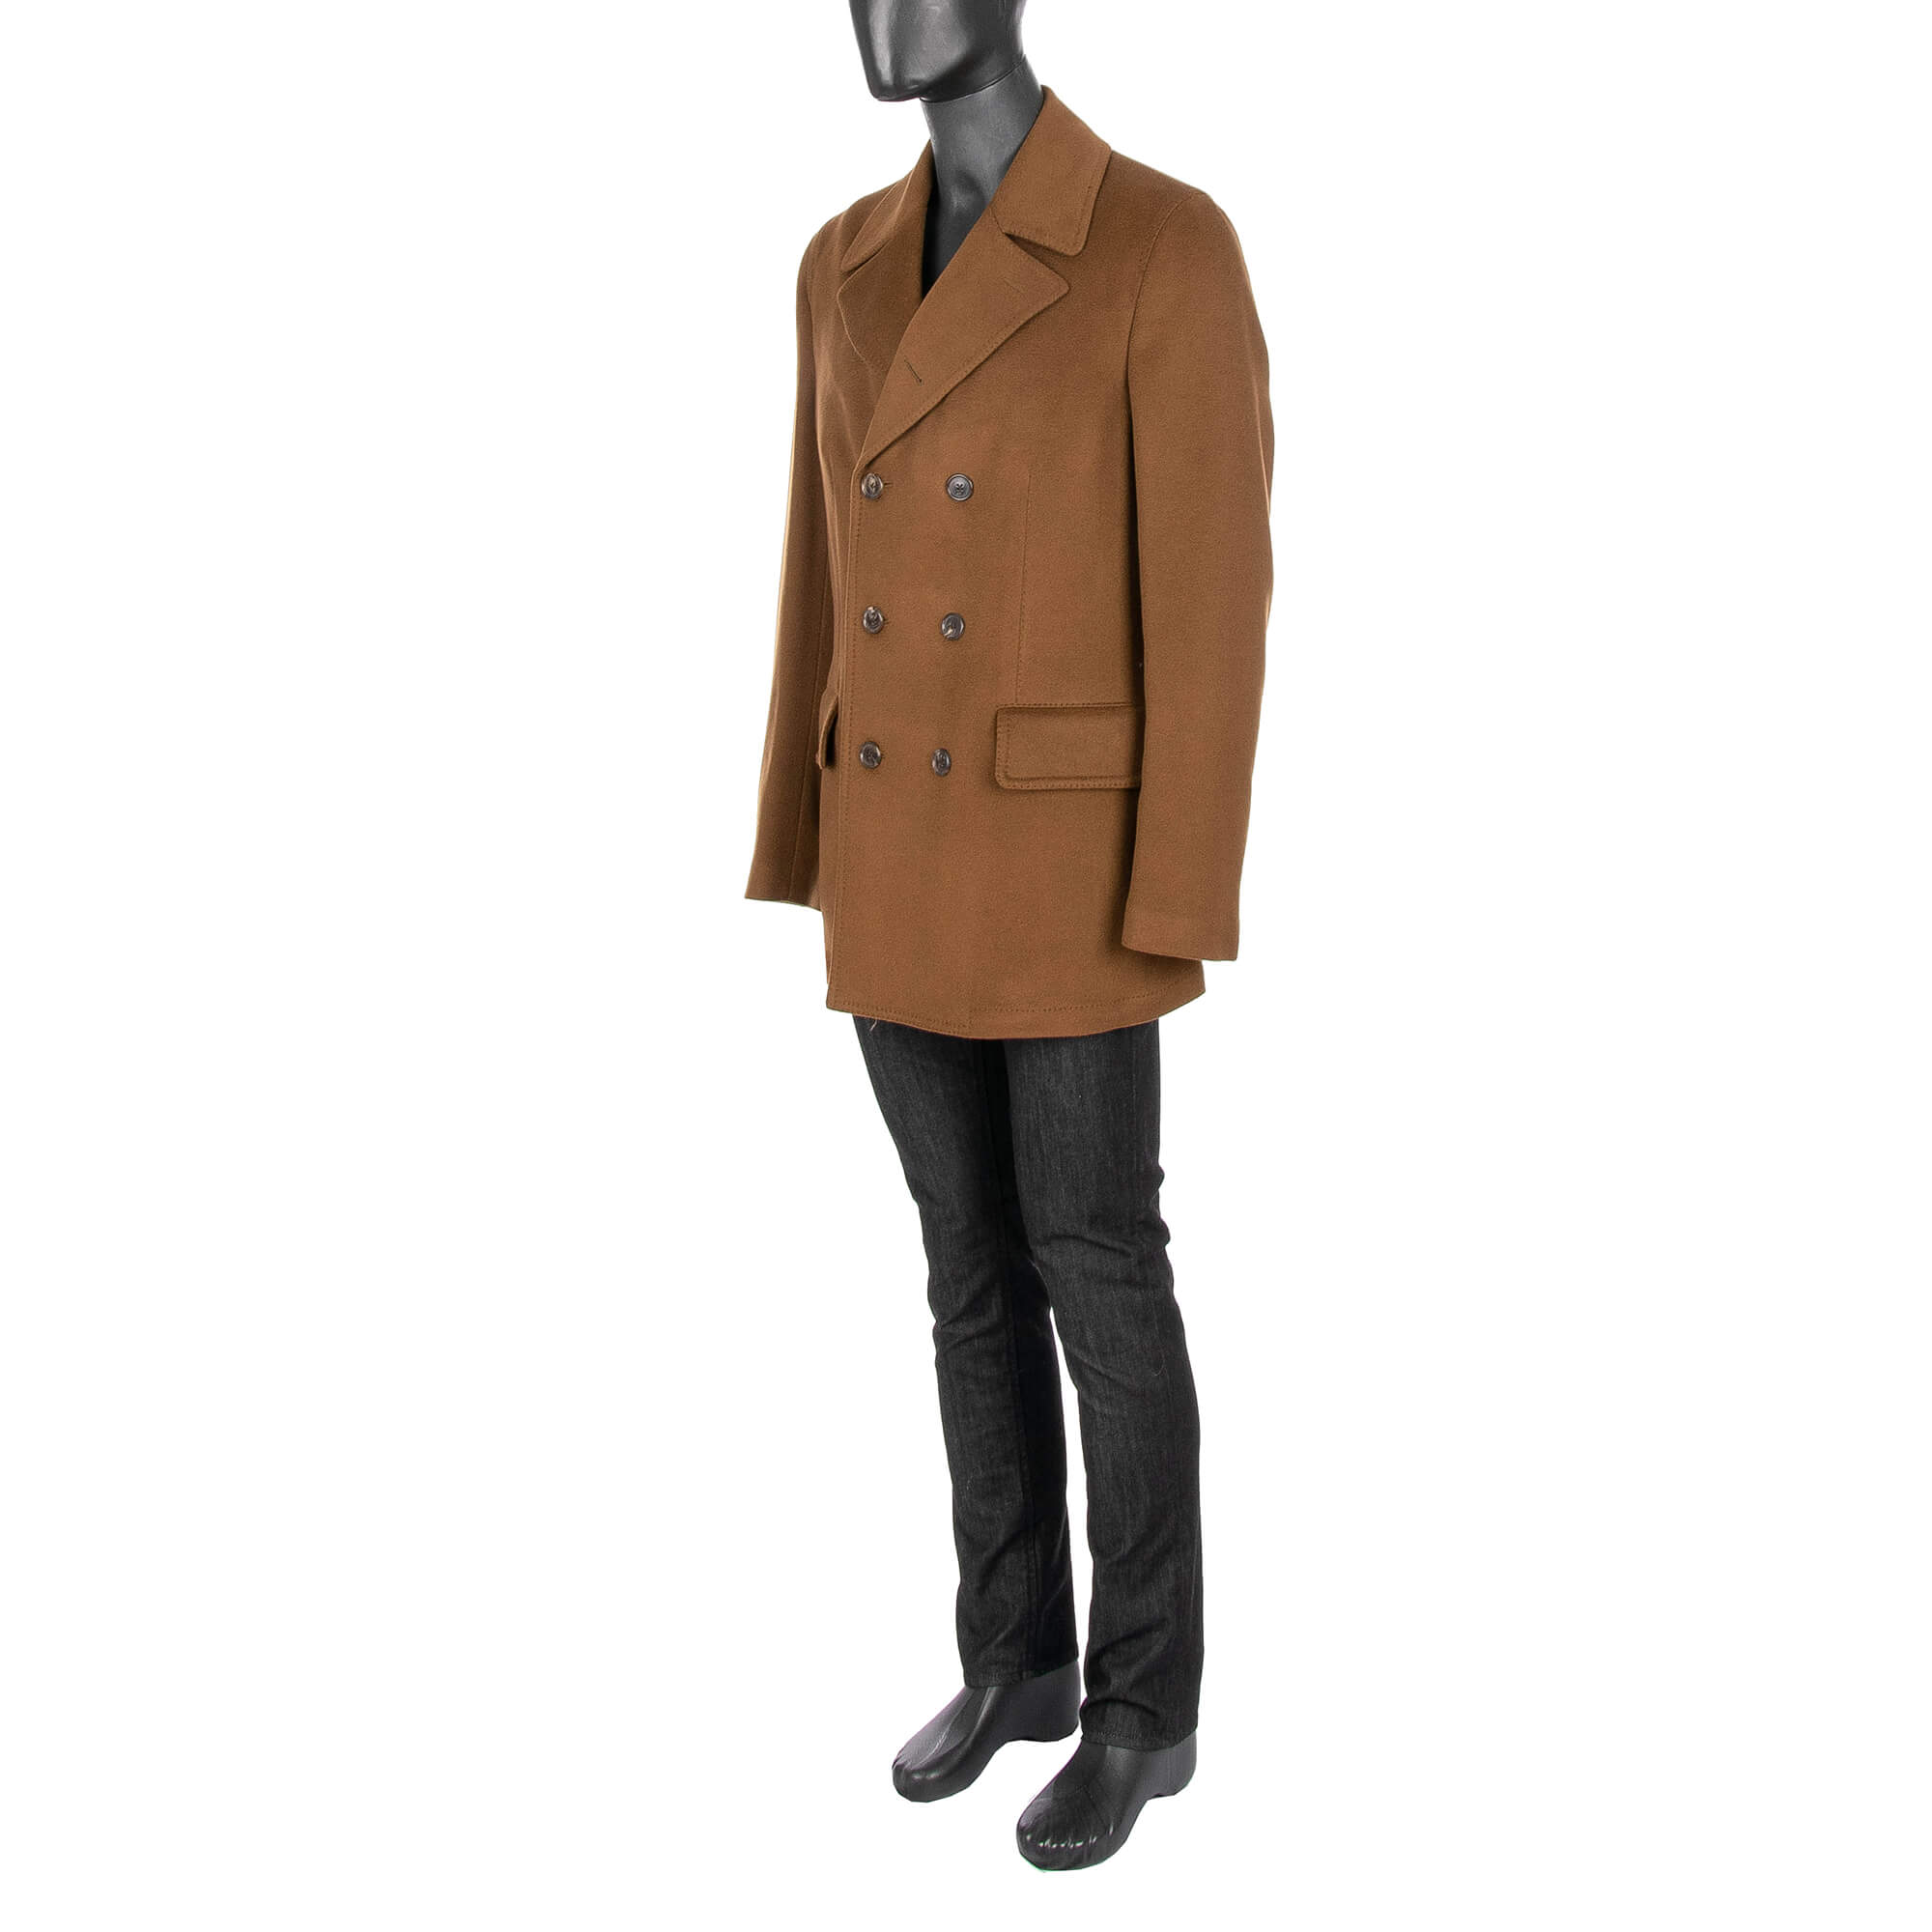 Cashemere Double Breasted Coat Camel